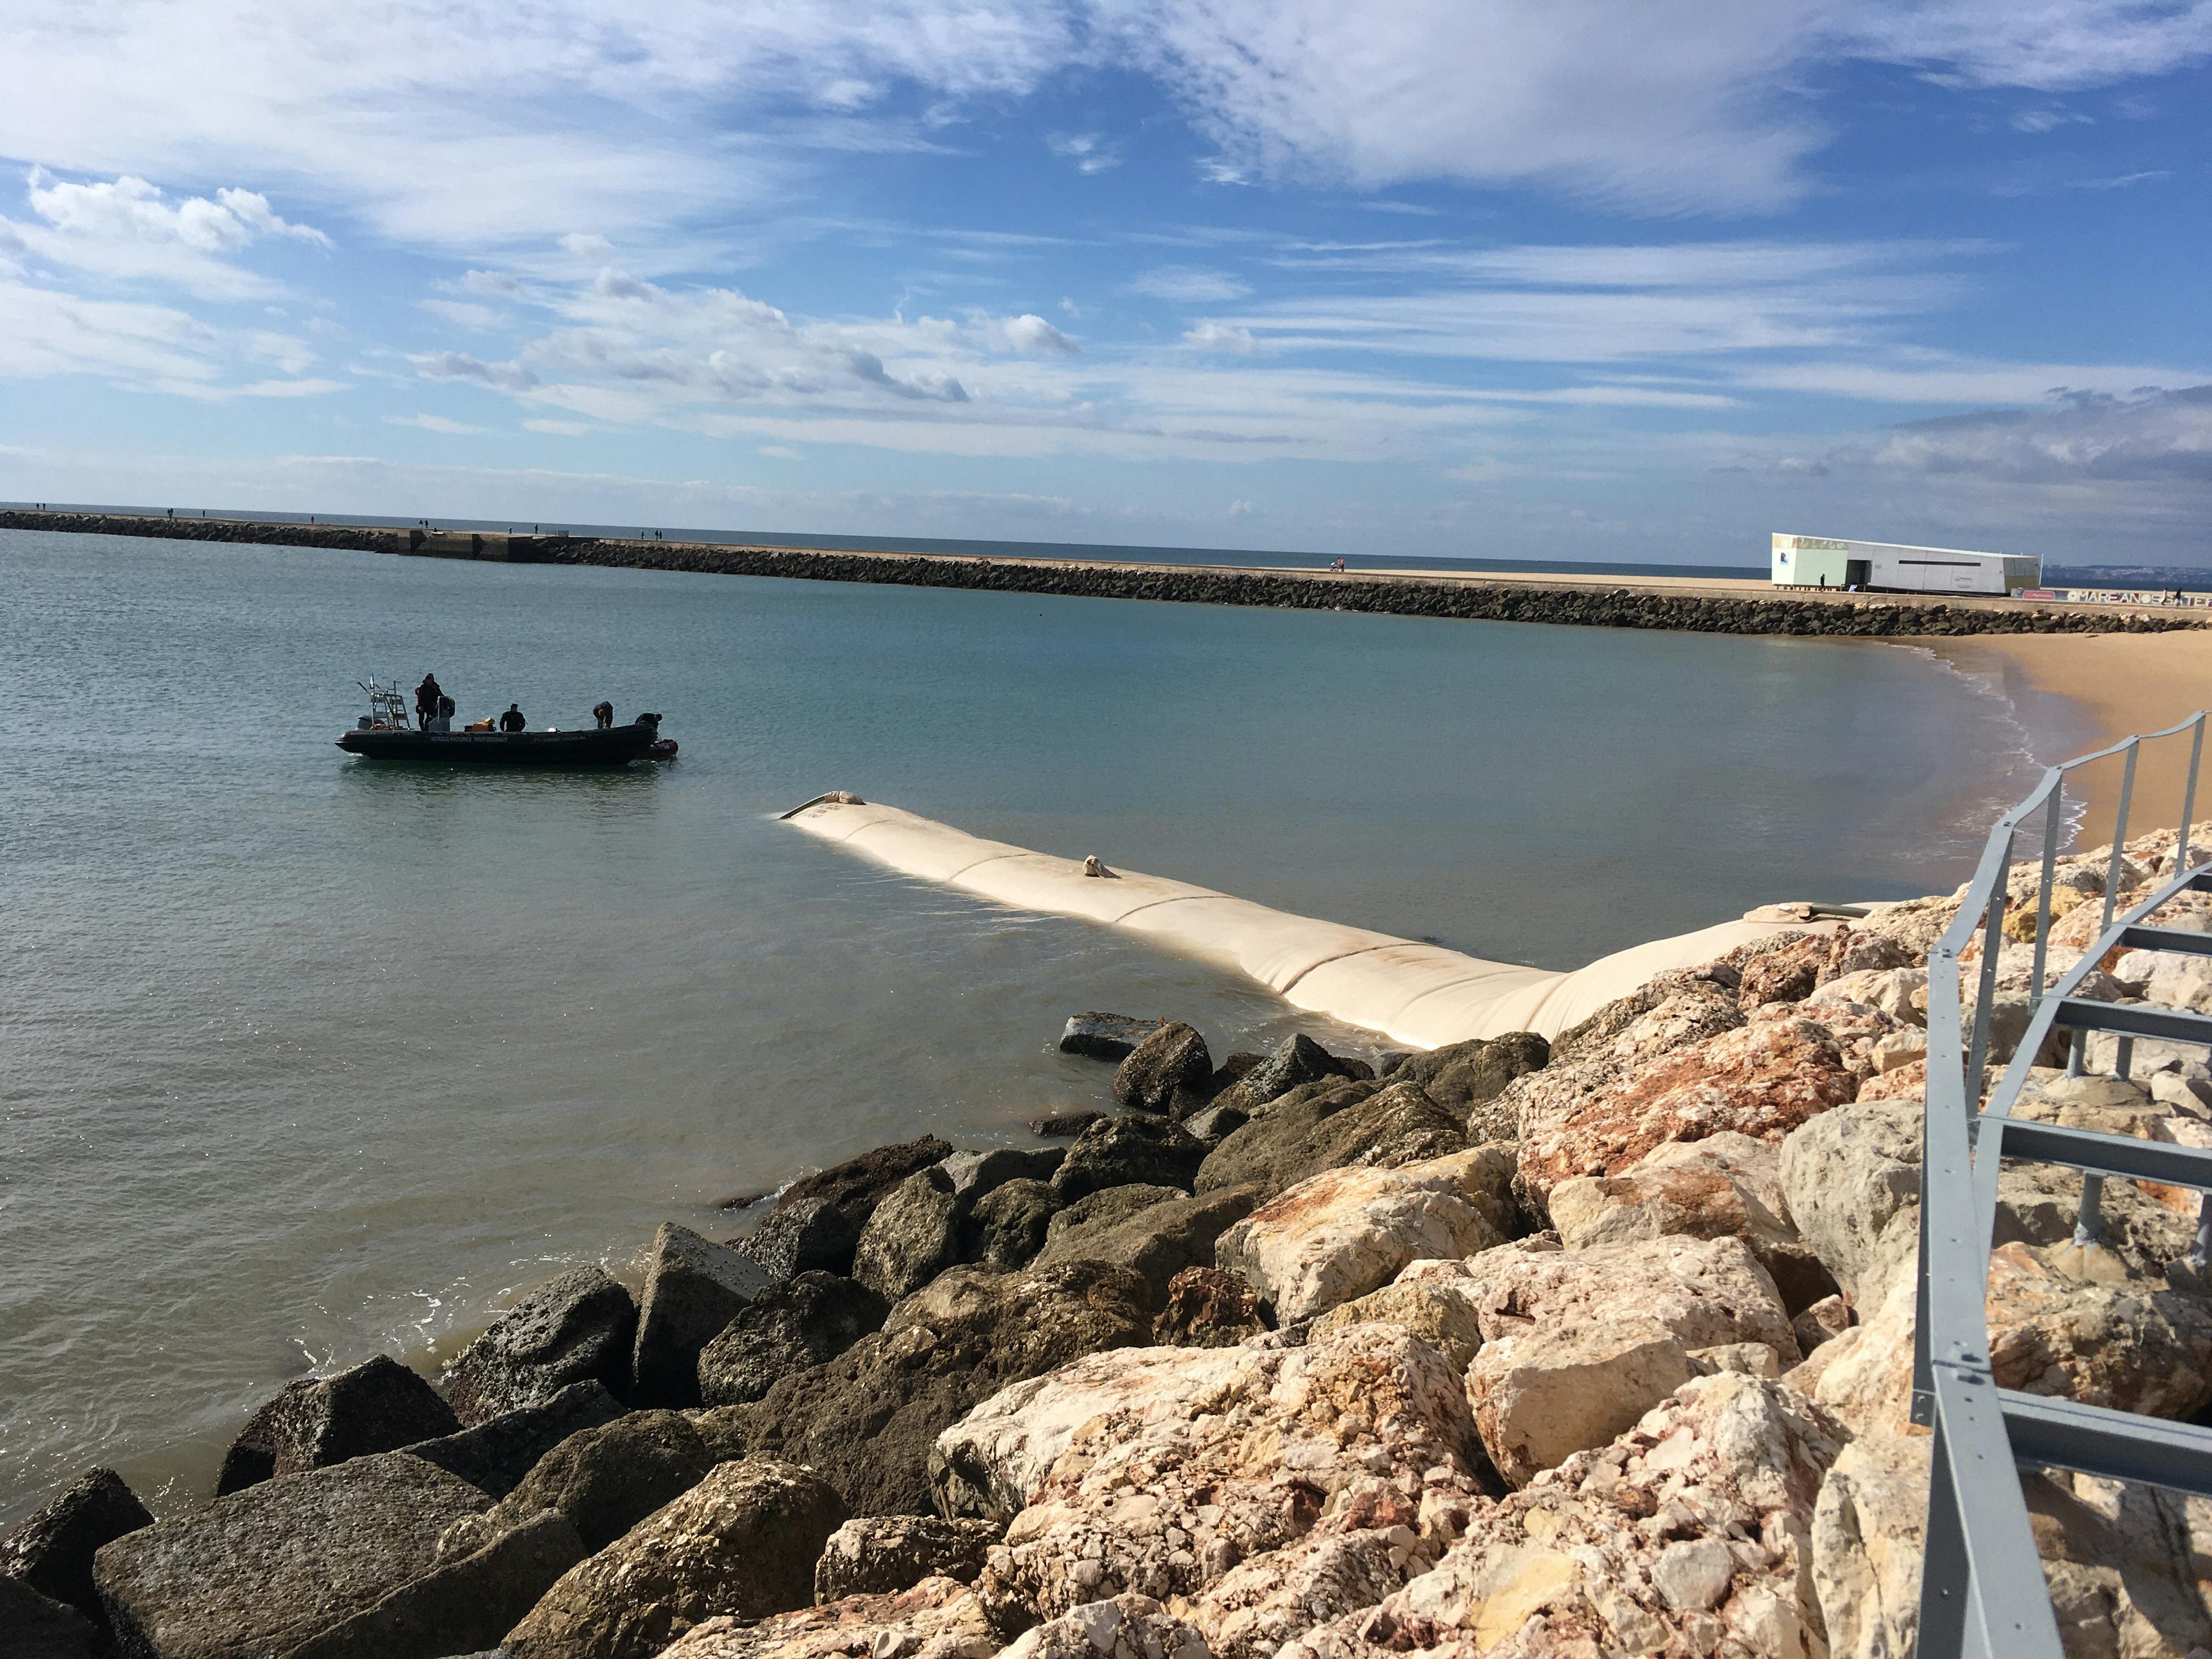 The Marina of Portimão project, led by Solmax and Geosin, innovatively created a beach with reduced wave action, using underwater GEOTUBE® systems, enhancing attractiveness and reducing maintenance costs. 